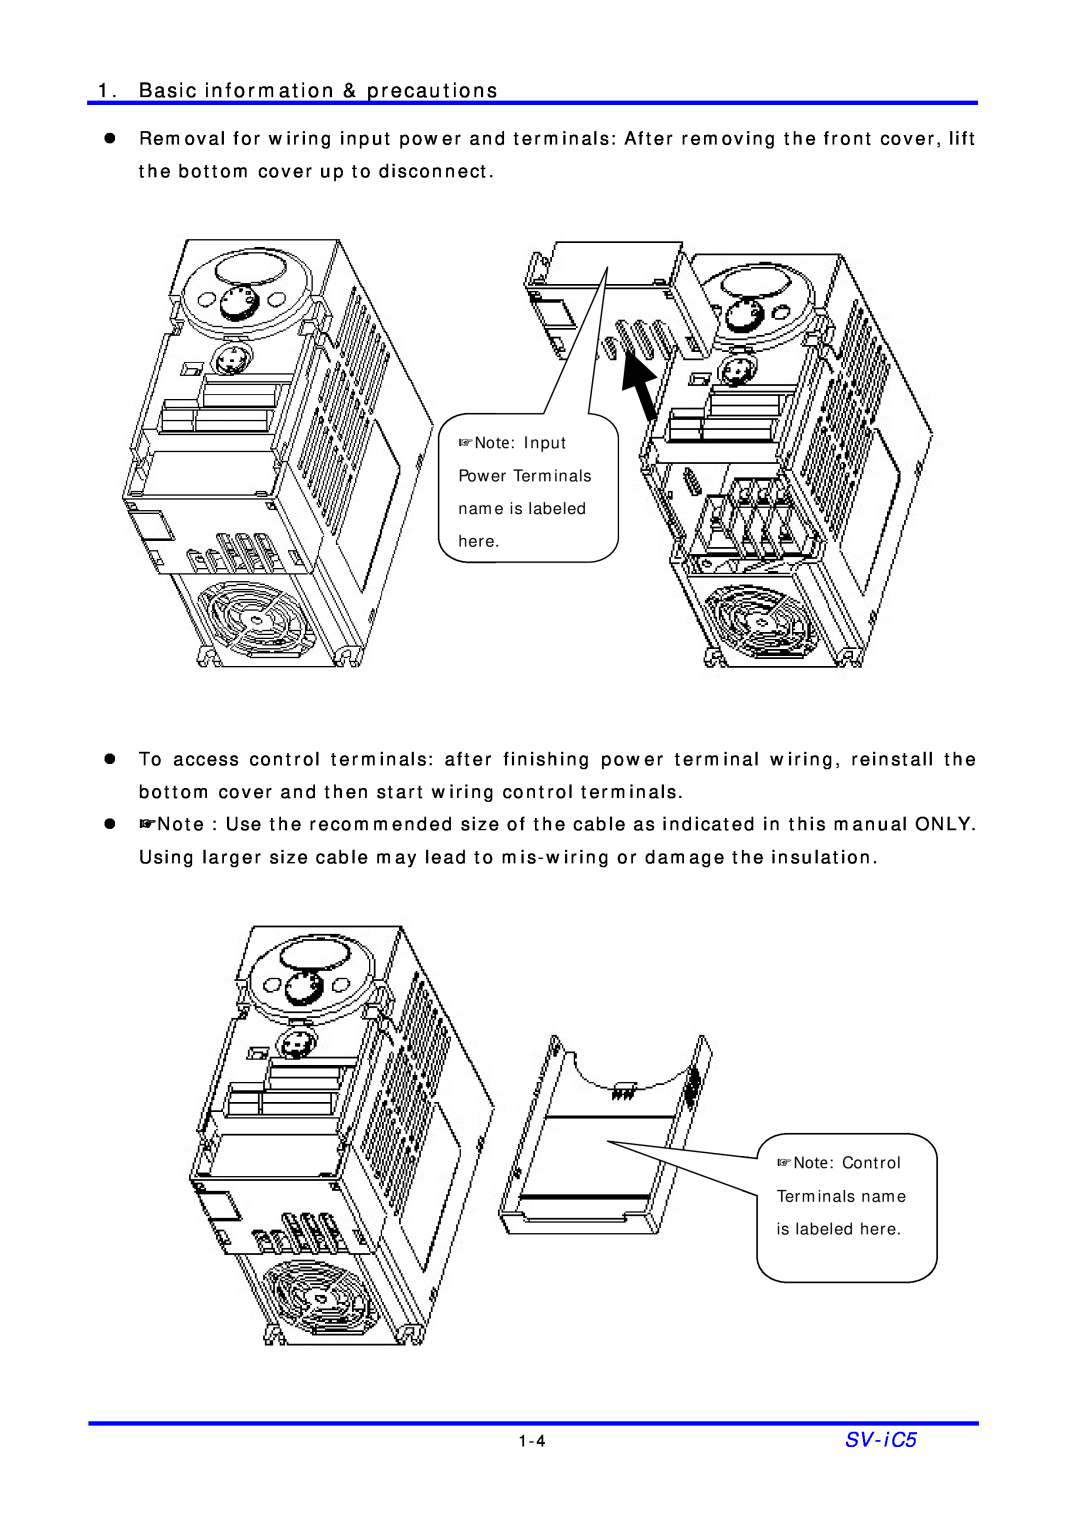 LG Electronics SV-iC5 Series manual Basic information & precautions, Note Input Power Terminals name is labeled here 